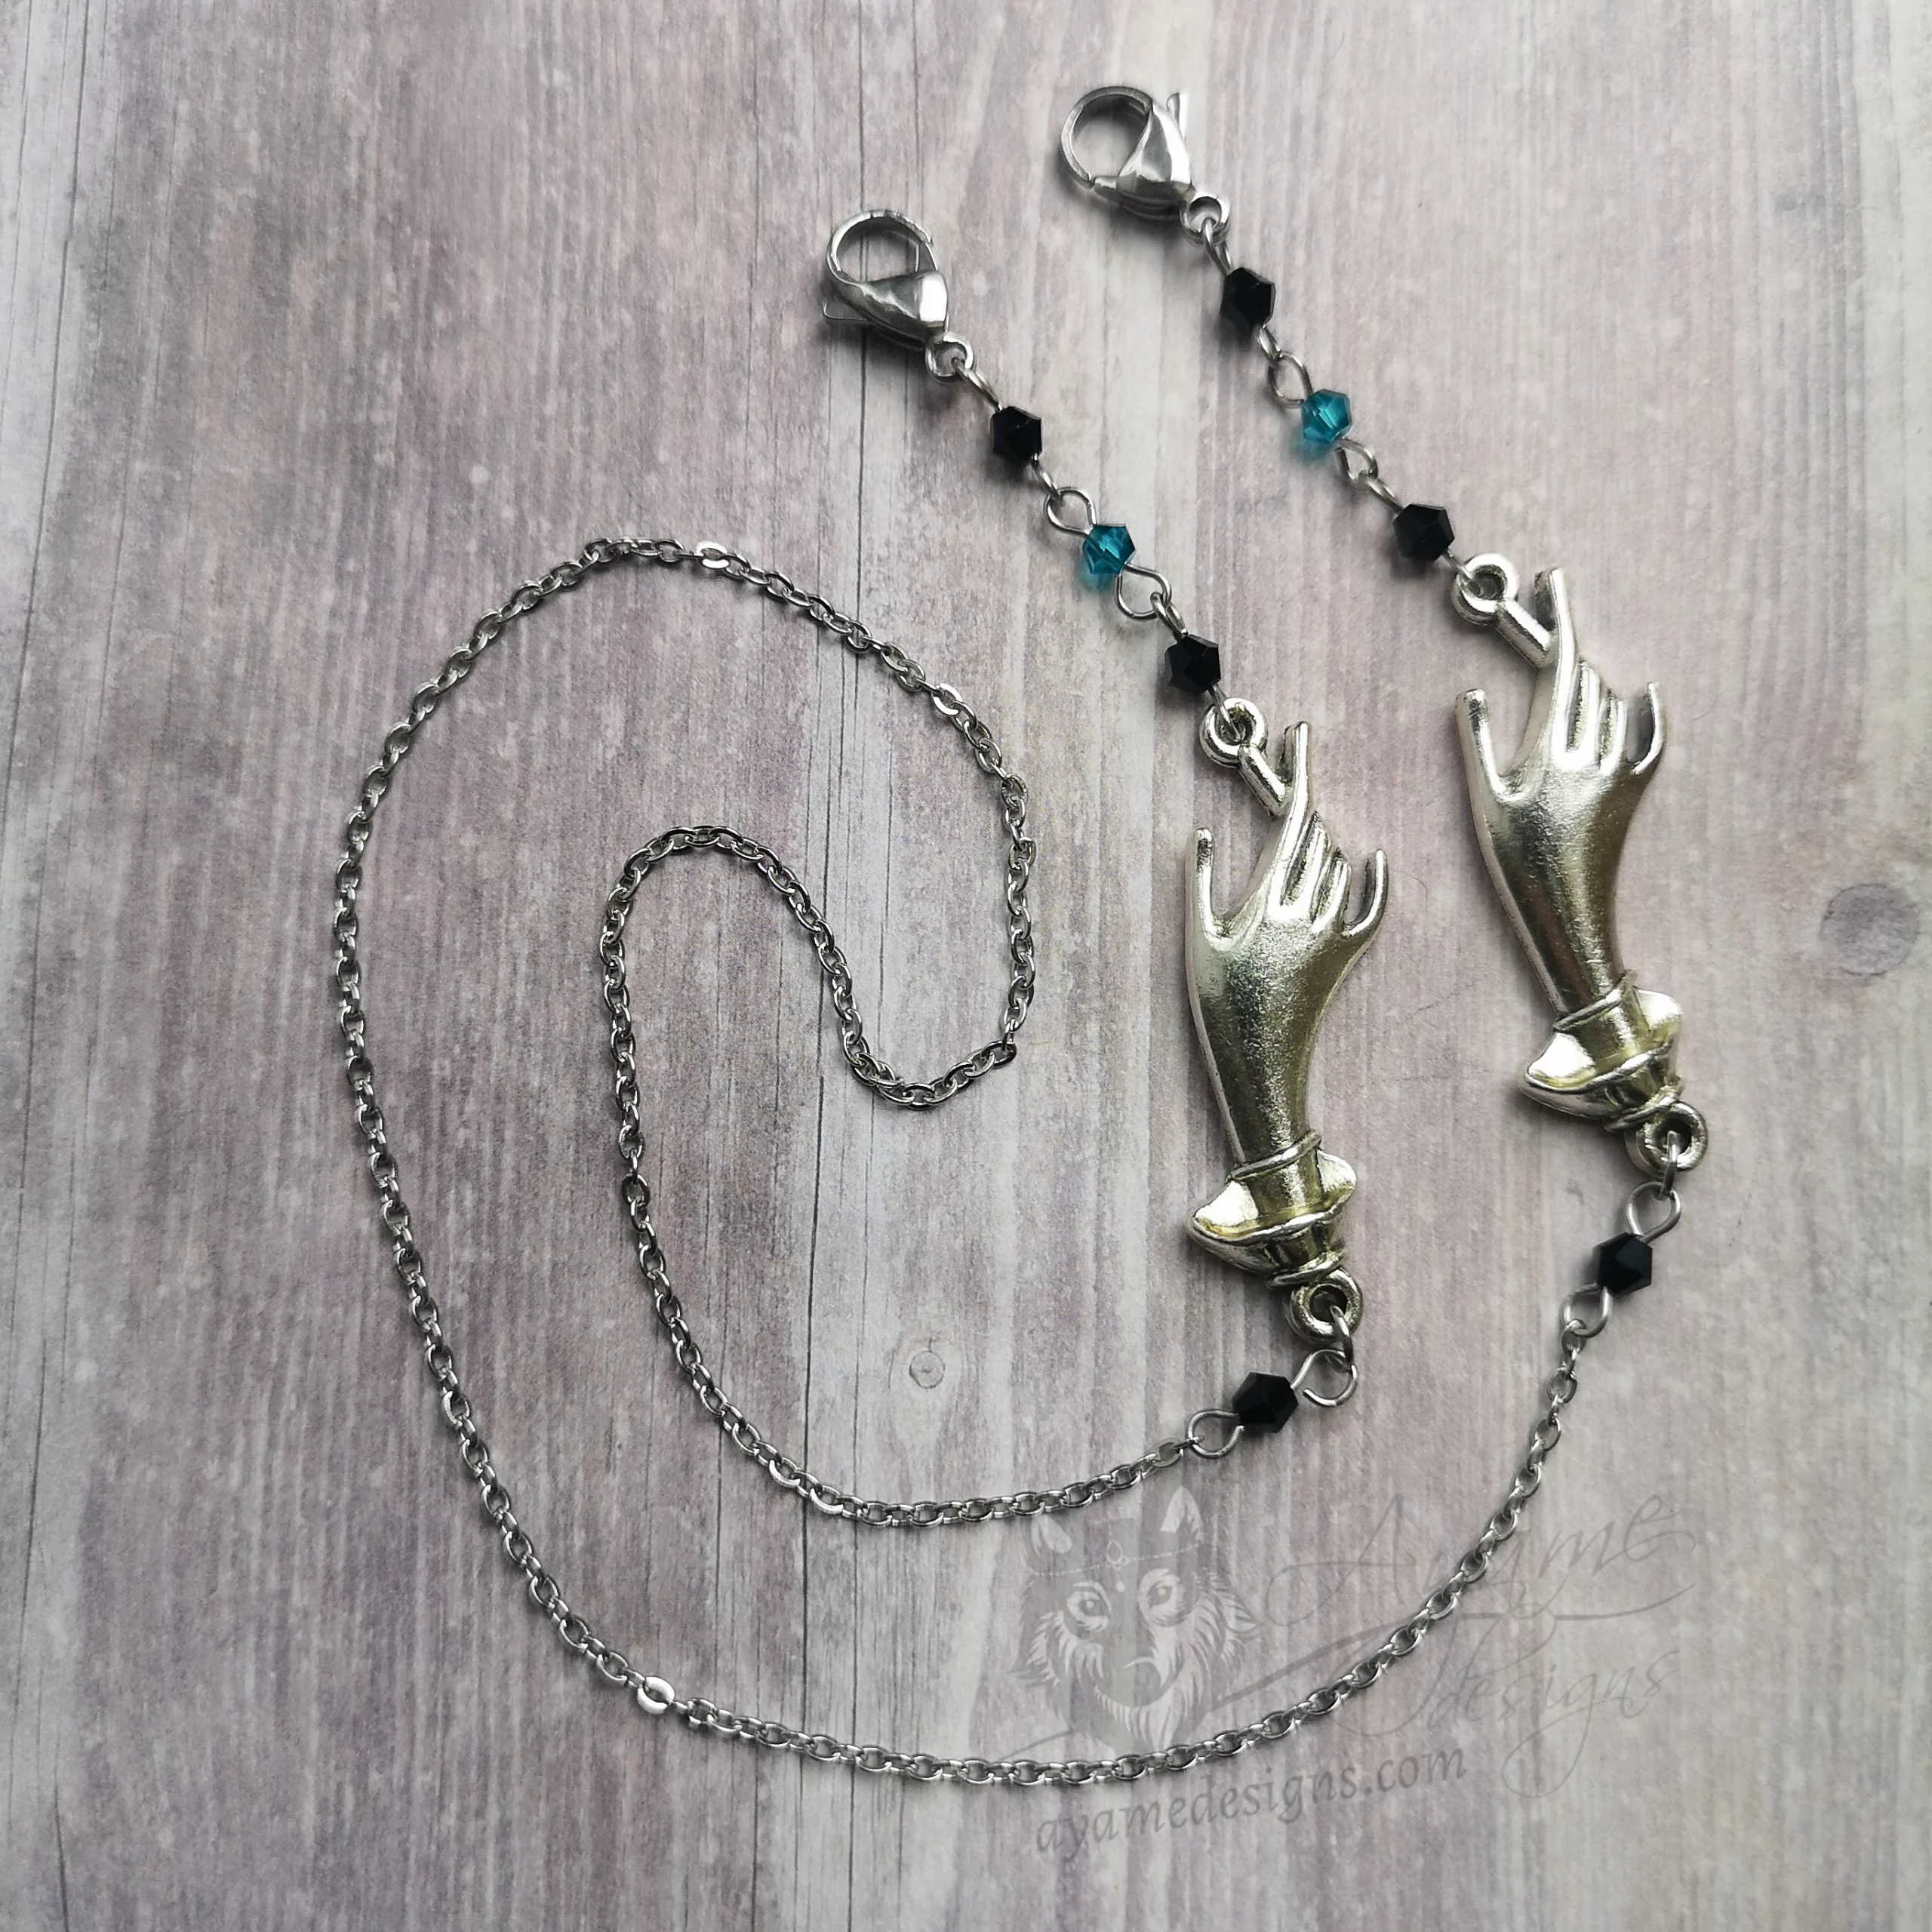 Handmade gothic mask chain with hand charms, teal and black Austrian crystal beads and stainless steel chain